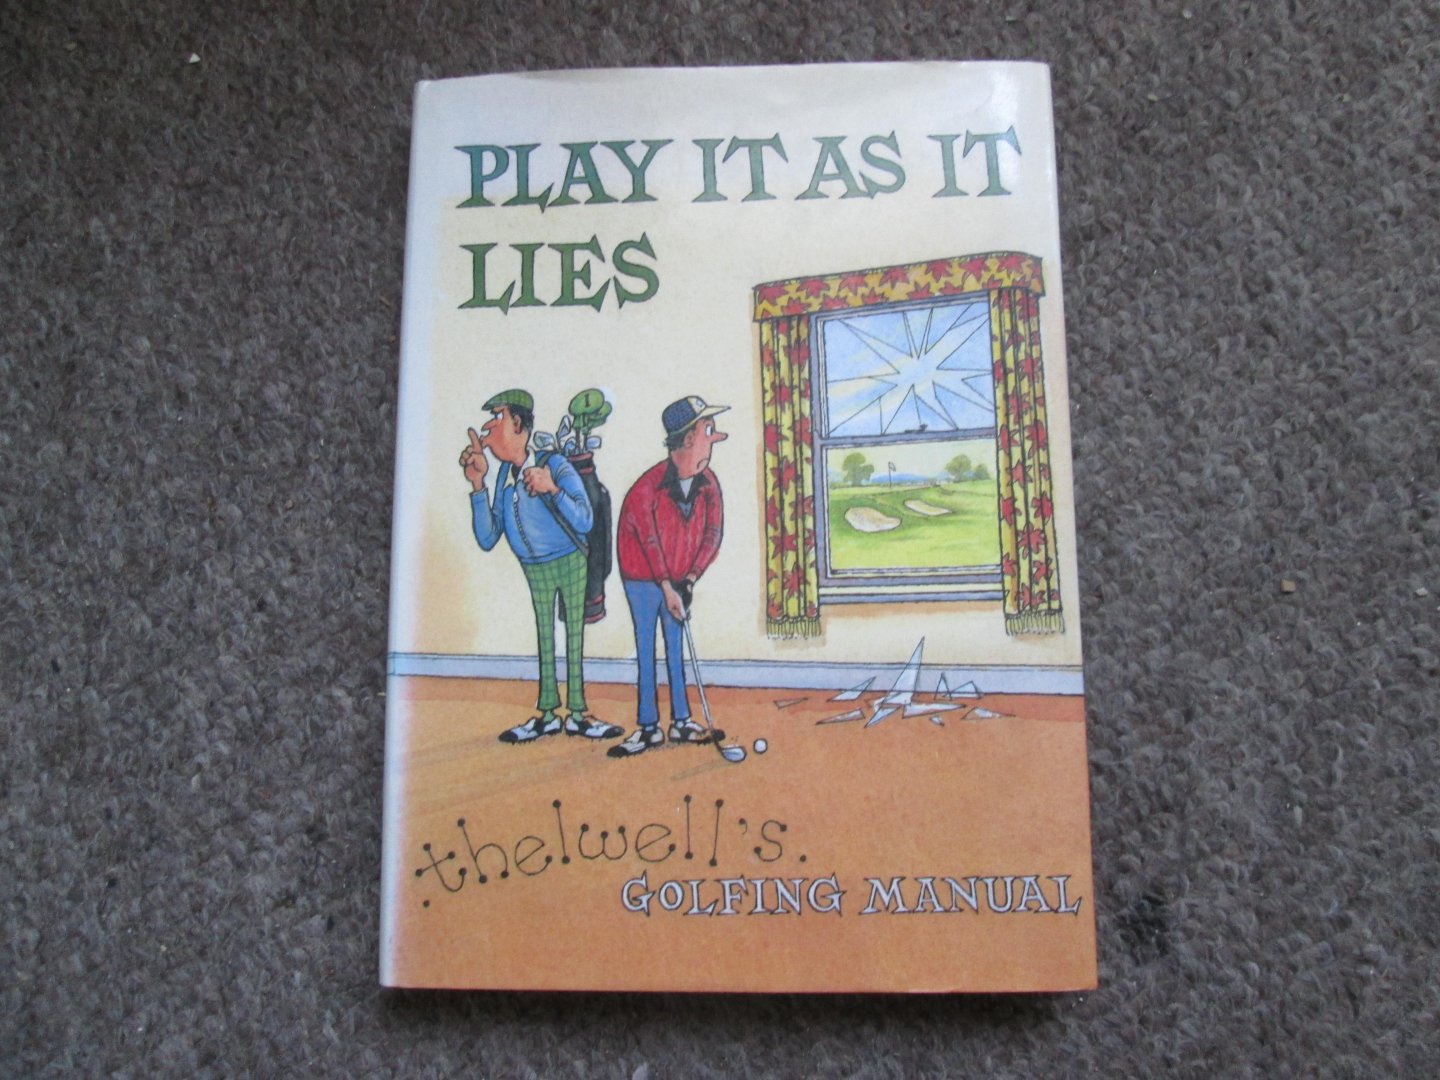 Thelwell , Norman - PLAY IT AS IT LIES ( Thelwell 's Golfing Manual - CARTOONS )